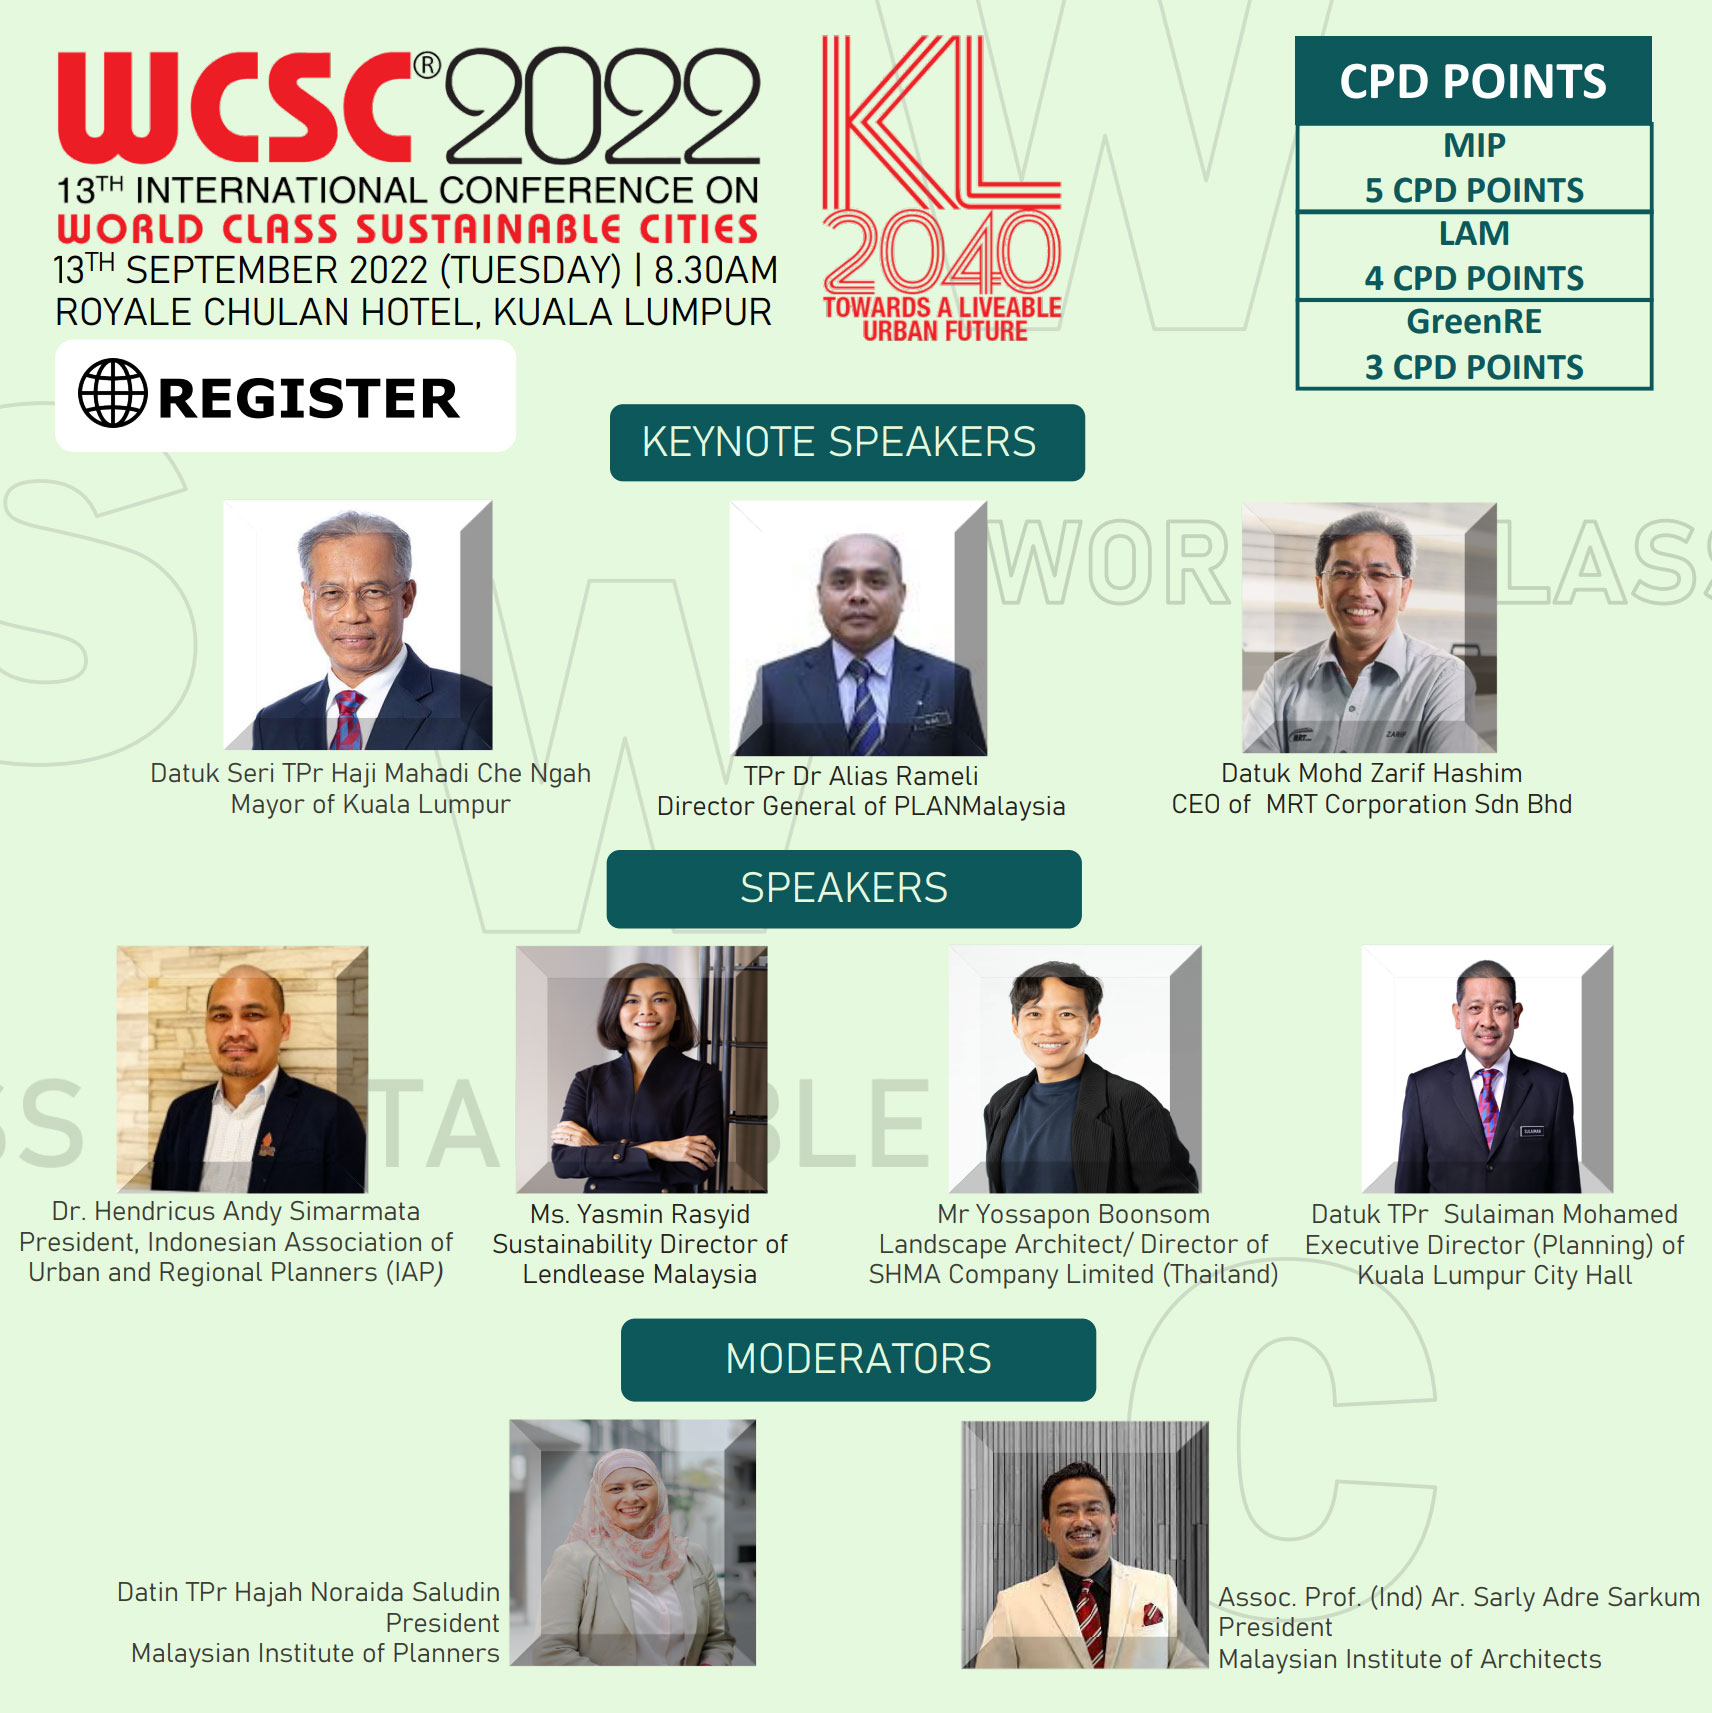 International Conference on World Class Sustainable Cities (WCSC)